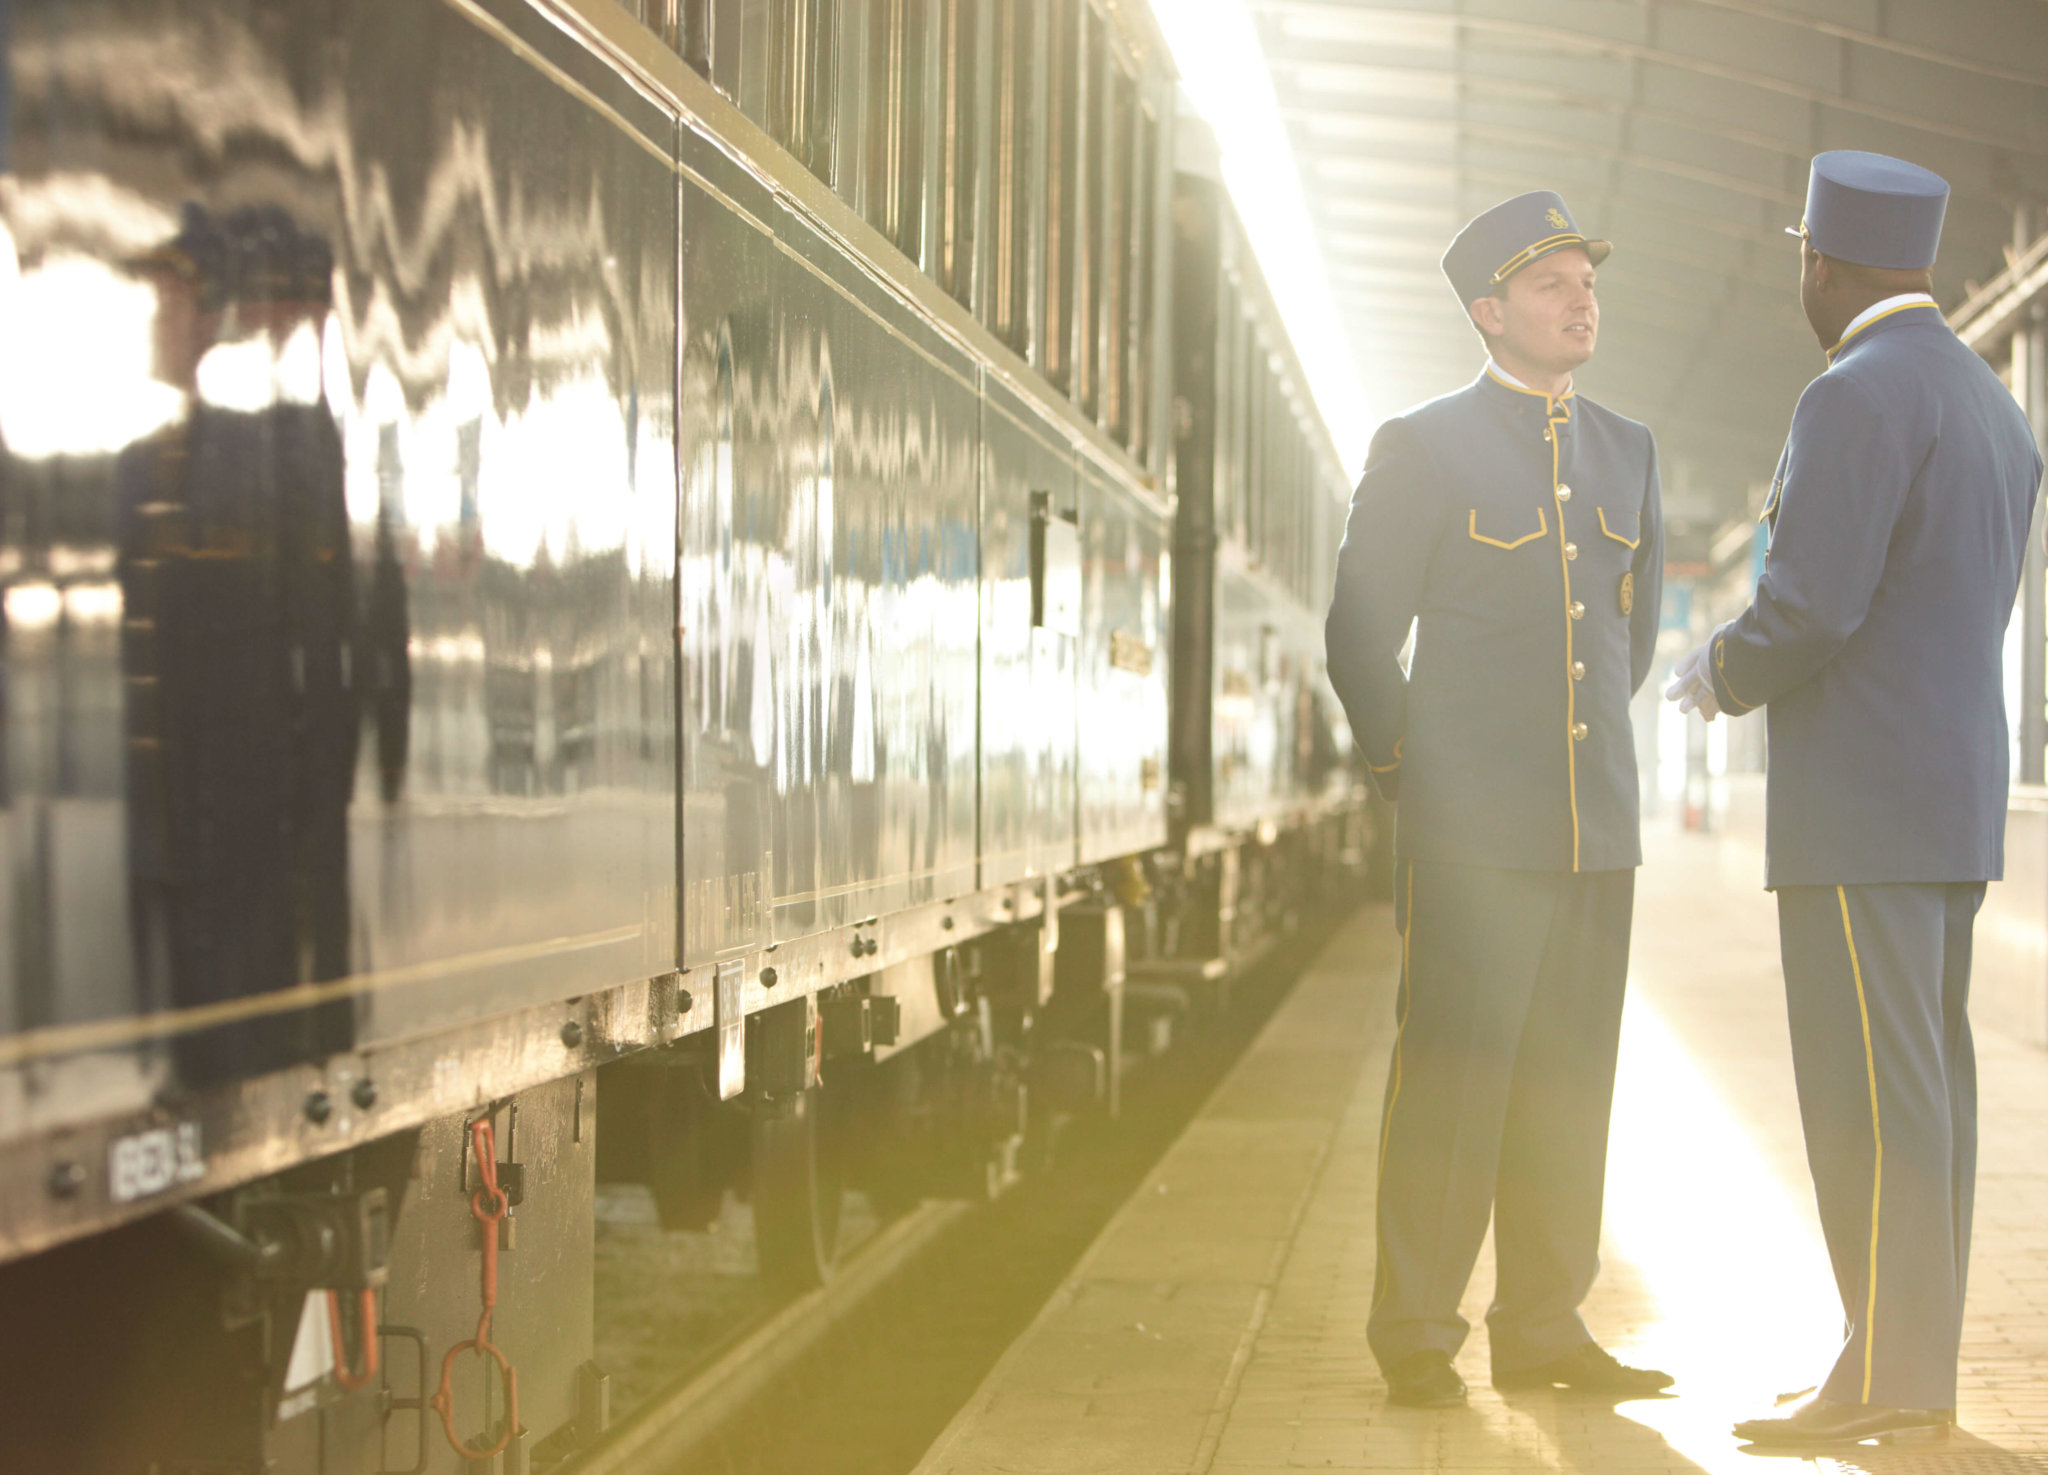 Just Back From The Venice Simplon-Orient-Express